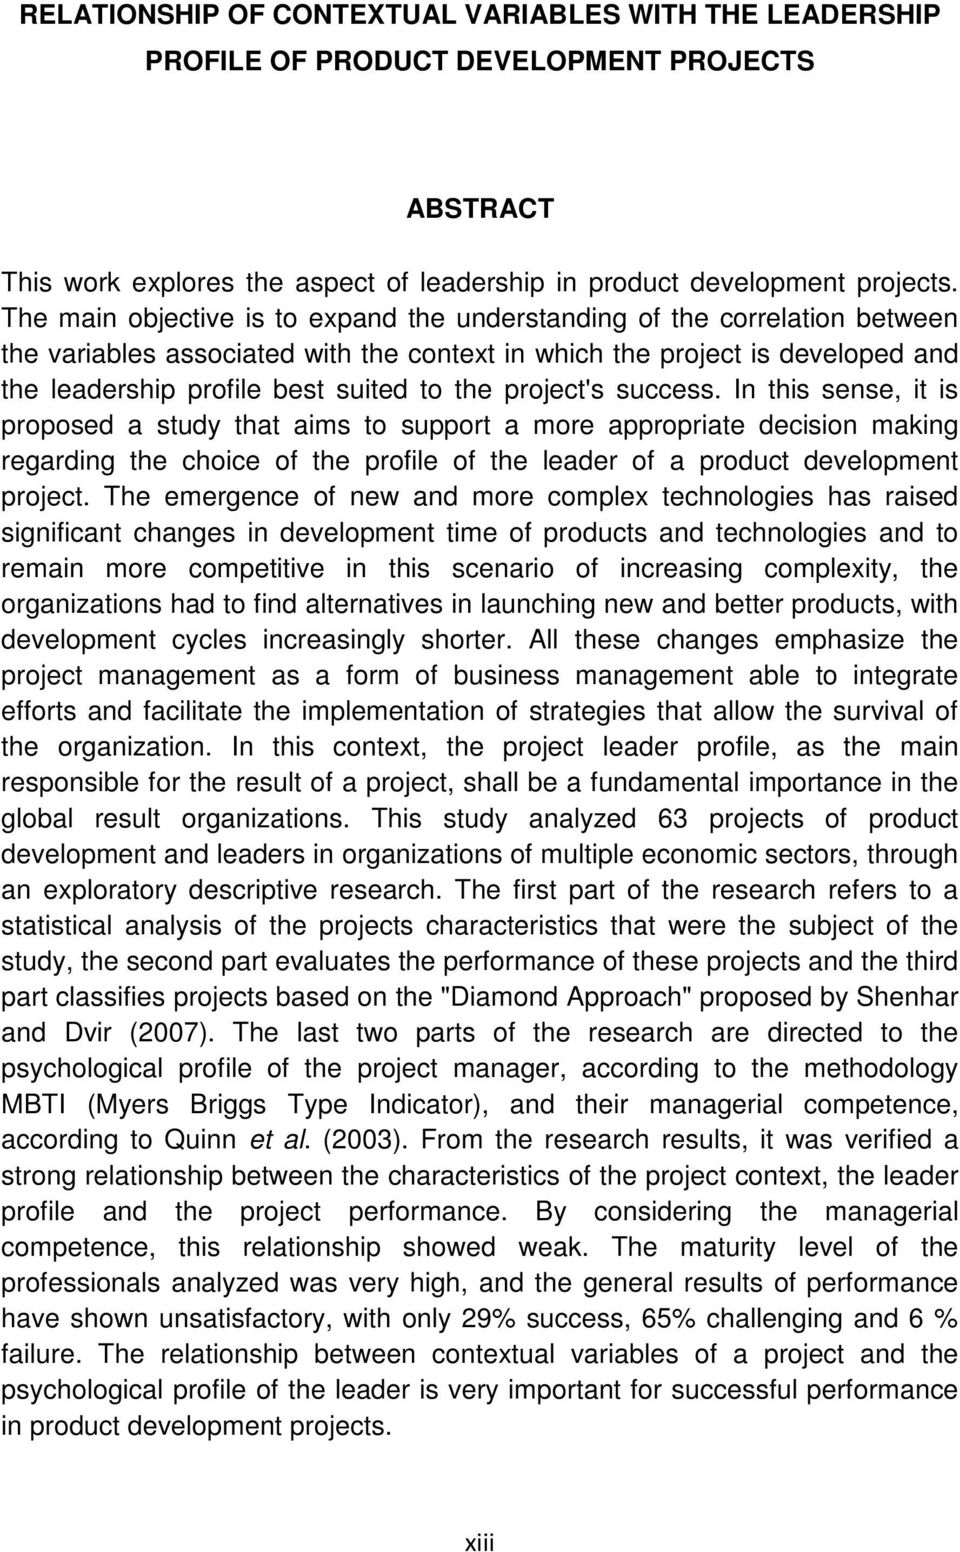 project's success. In this sense, it is proposed a study that aims to support a more appropriate decision making regarding the choice of the profile of the leader of a product development project.